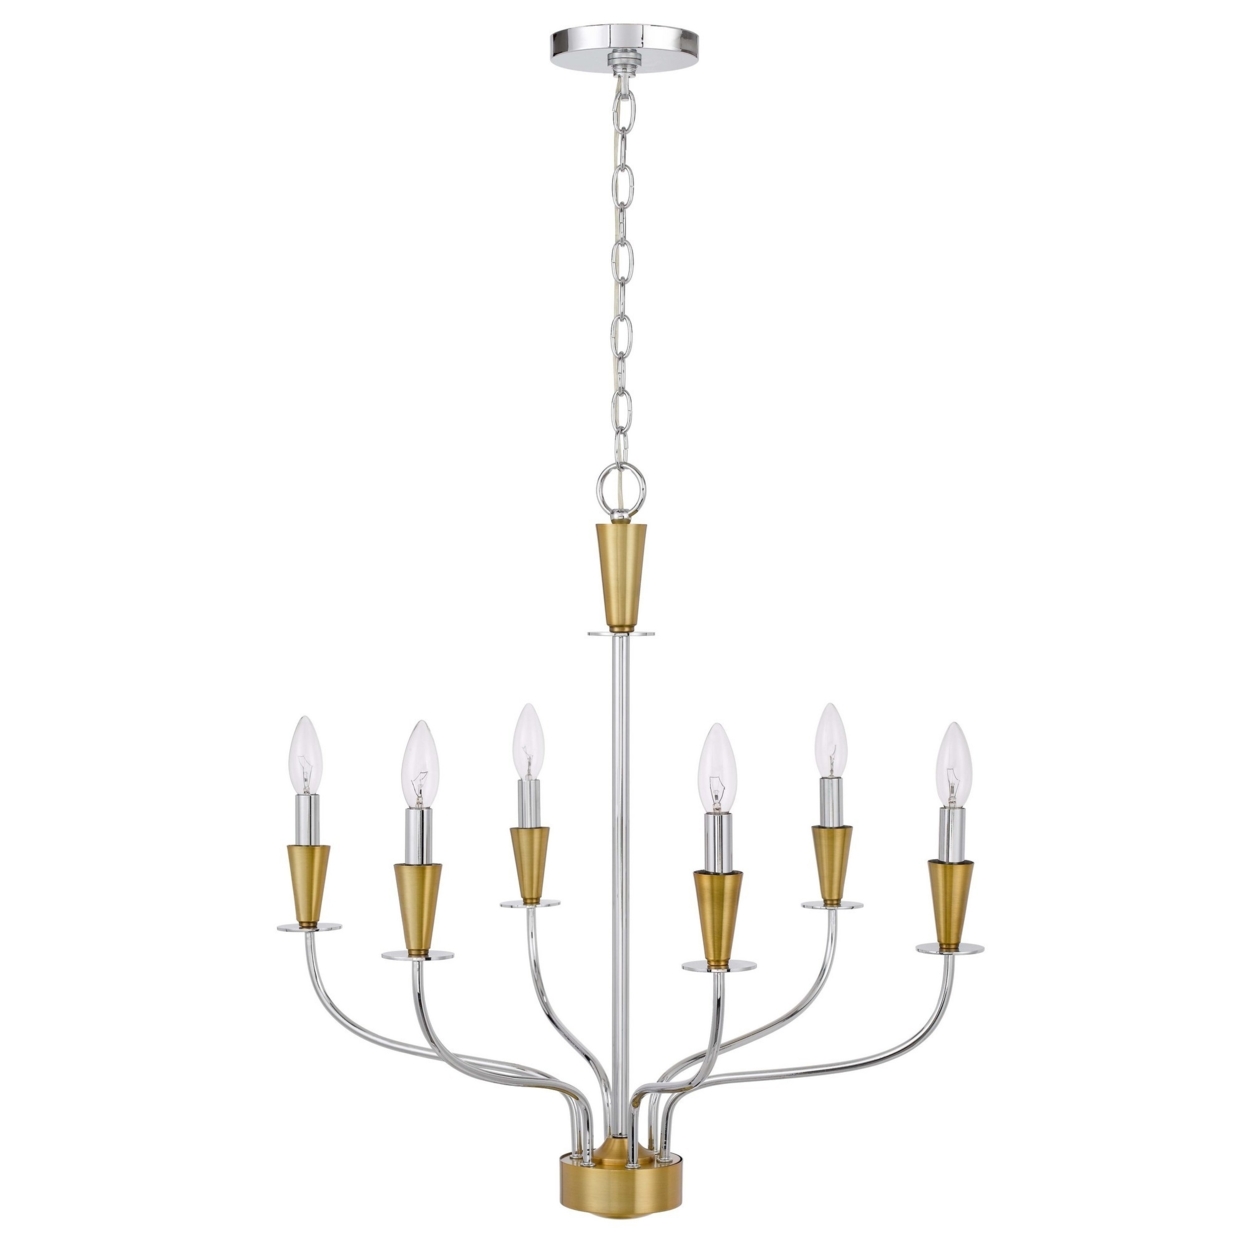 Chandelier With Metal Geometric Design And Hanging Chain, Chrome And Gold- Saltoro Sherpi